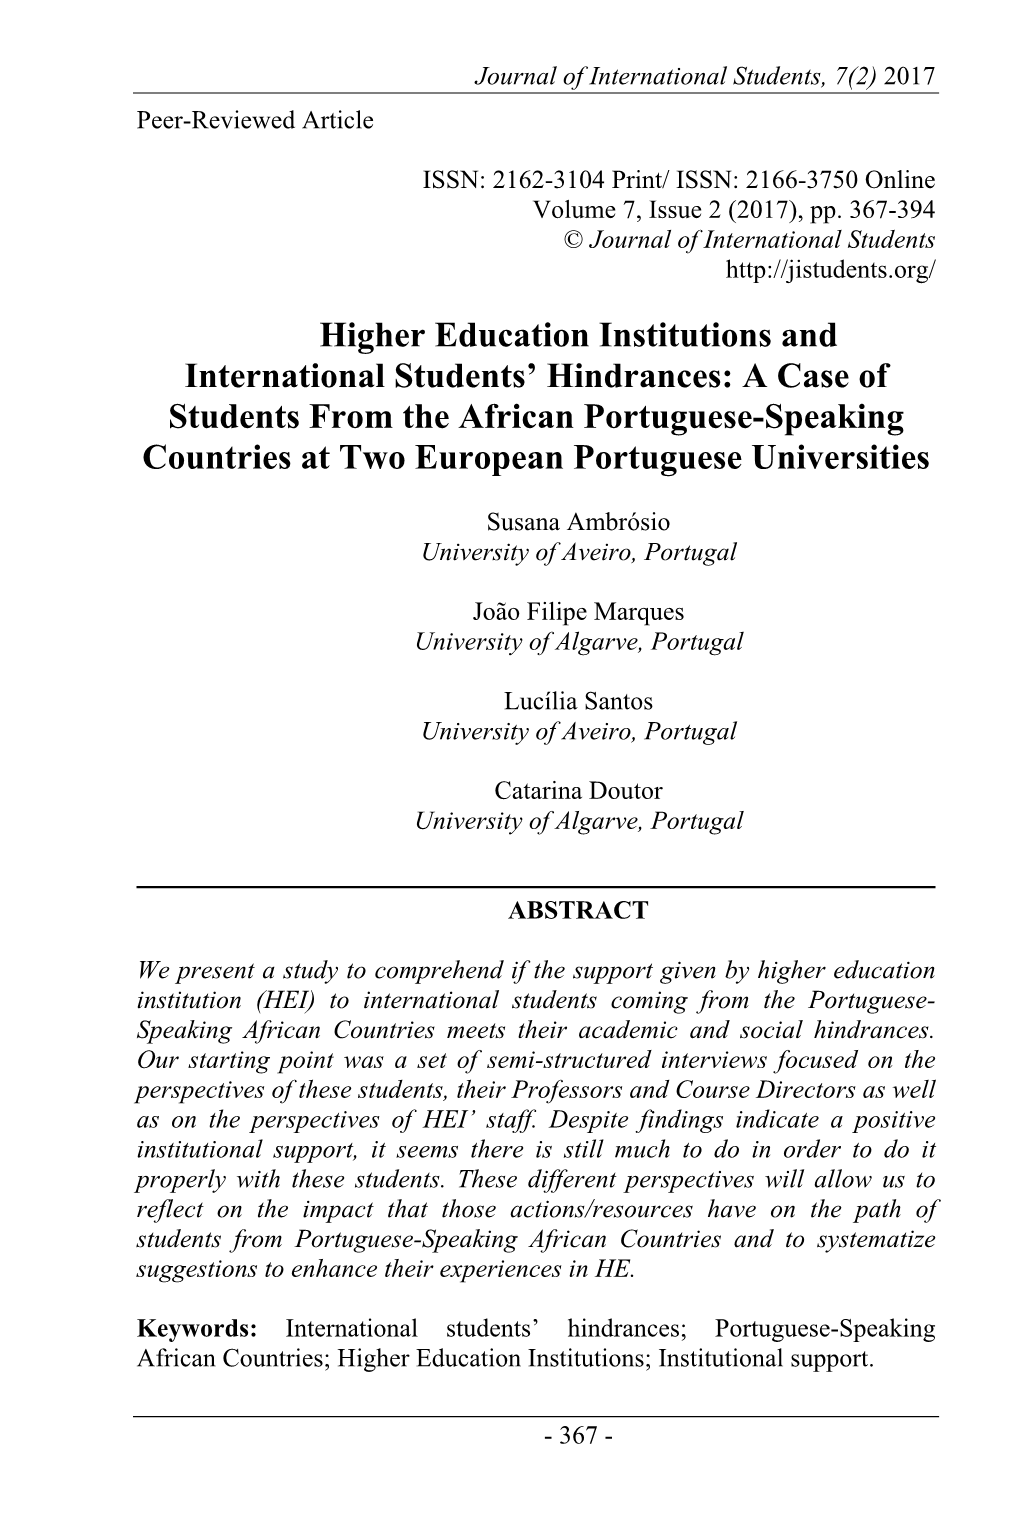 Higher Education Institutions and International Students' Hindrances